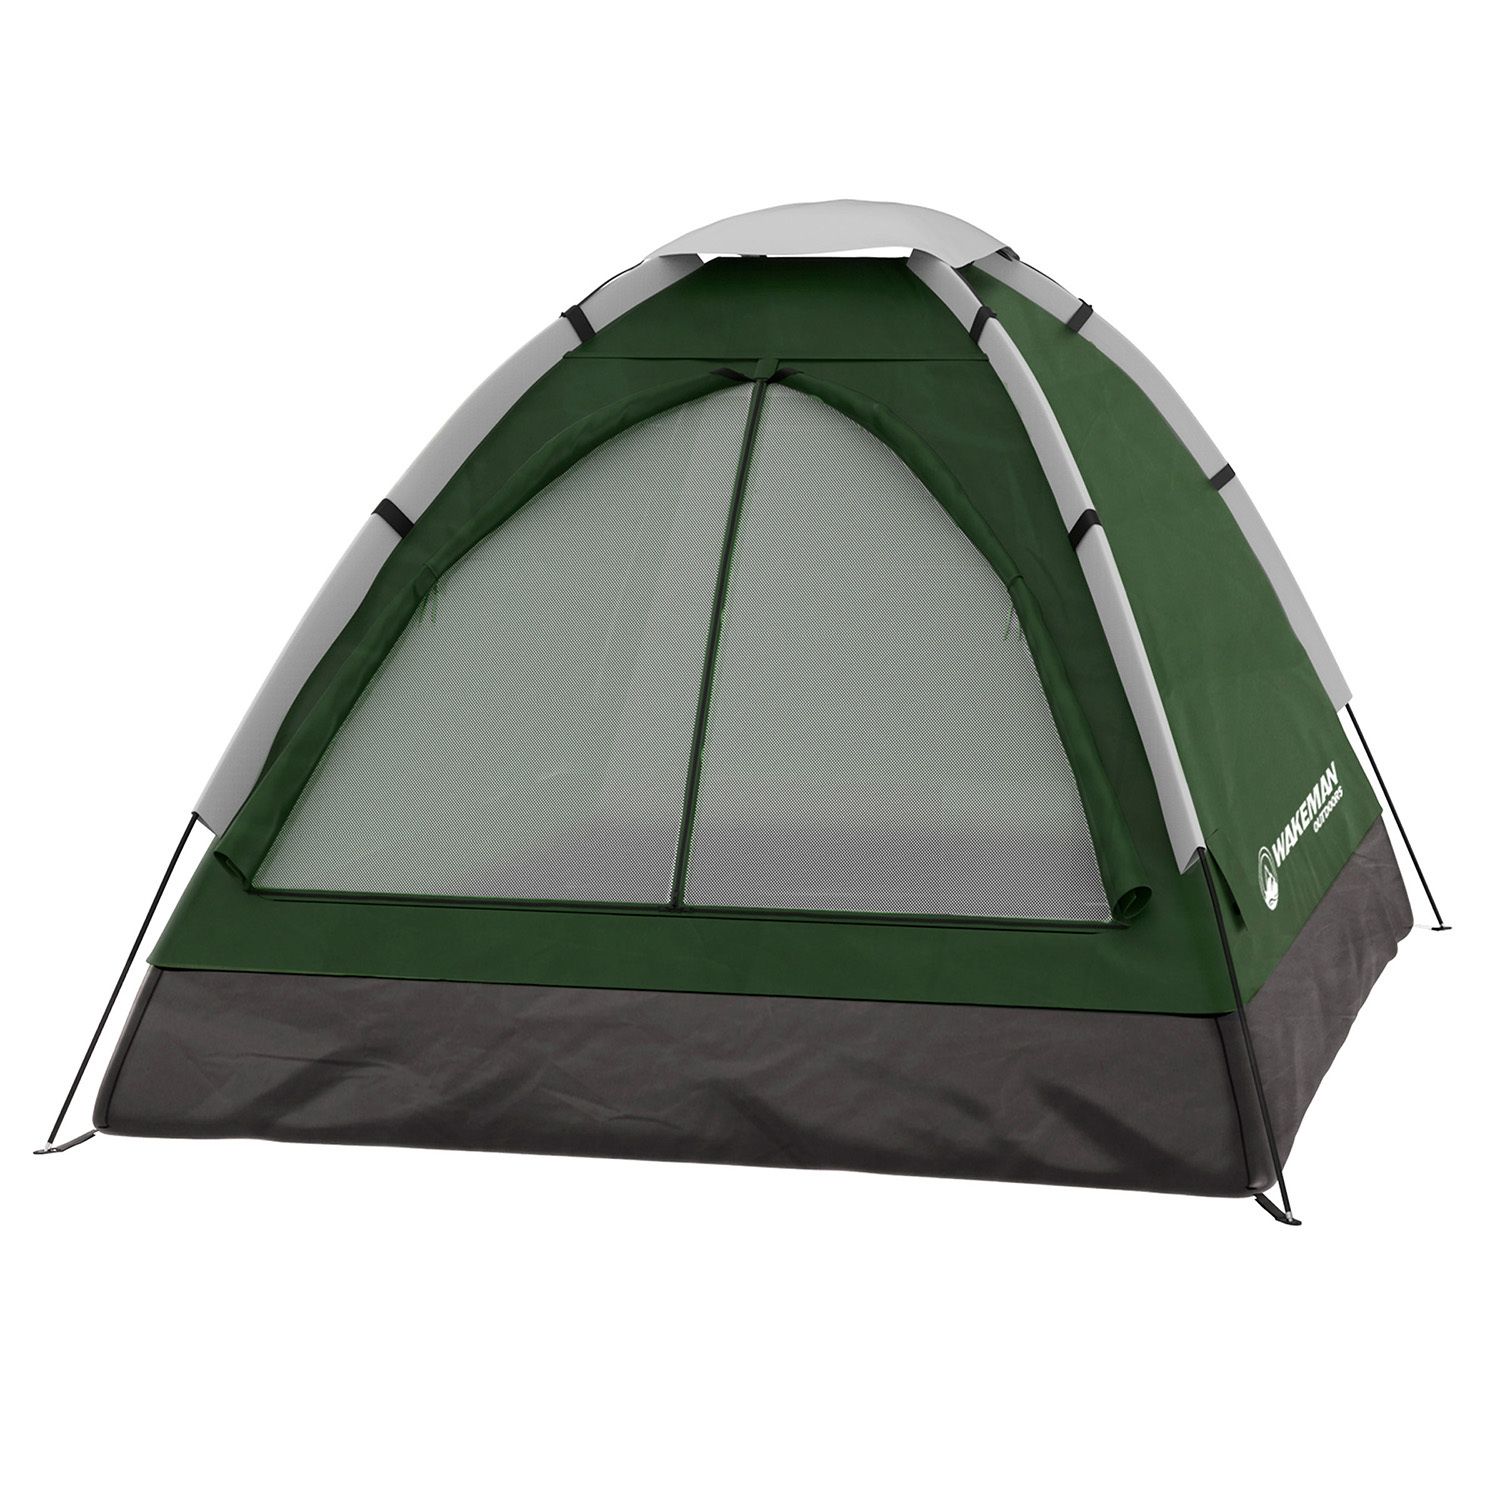 Outsunny 8-10 Man Camping Tent with Weatherproof Rain Cover, Double Layer Backpacking